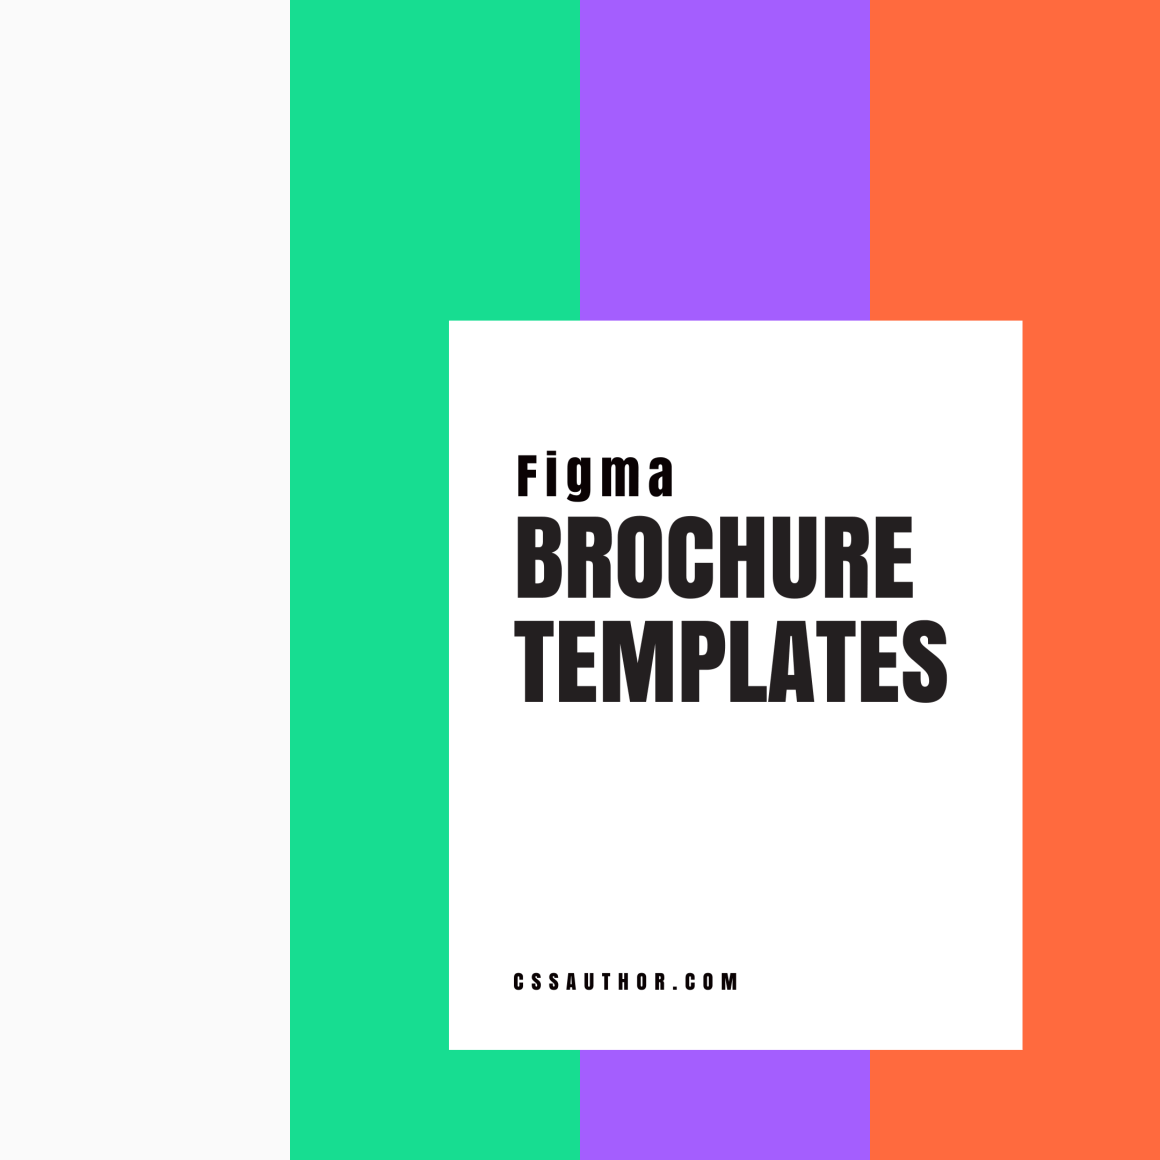 10+ Must-Have Figma Brochure Templates for Professional Presentations